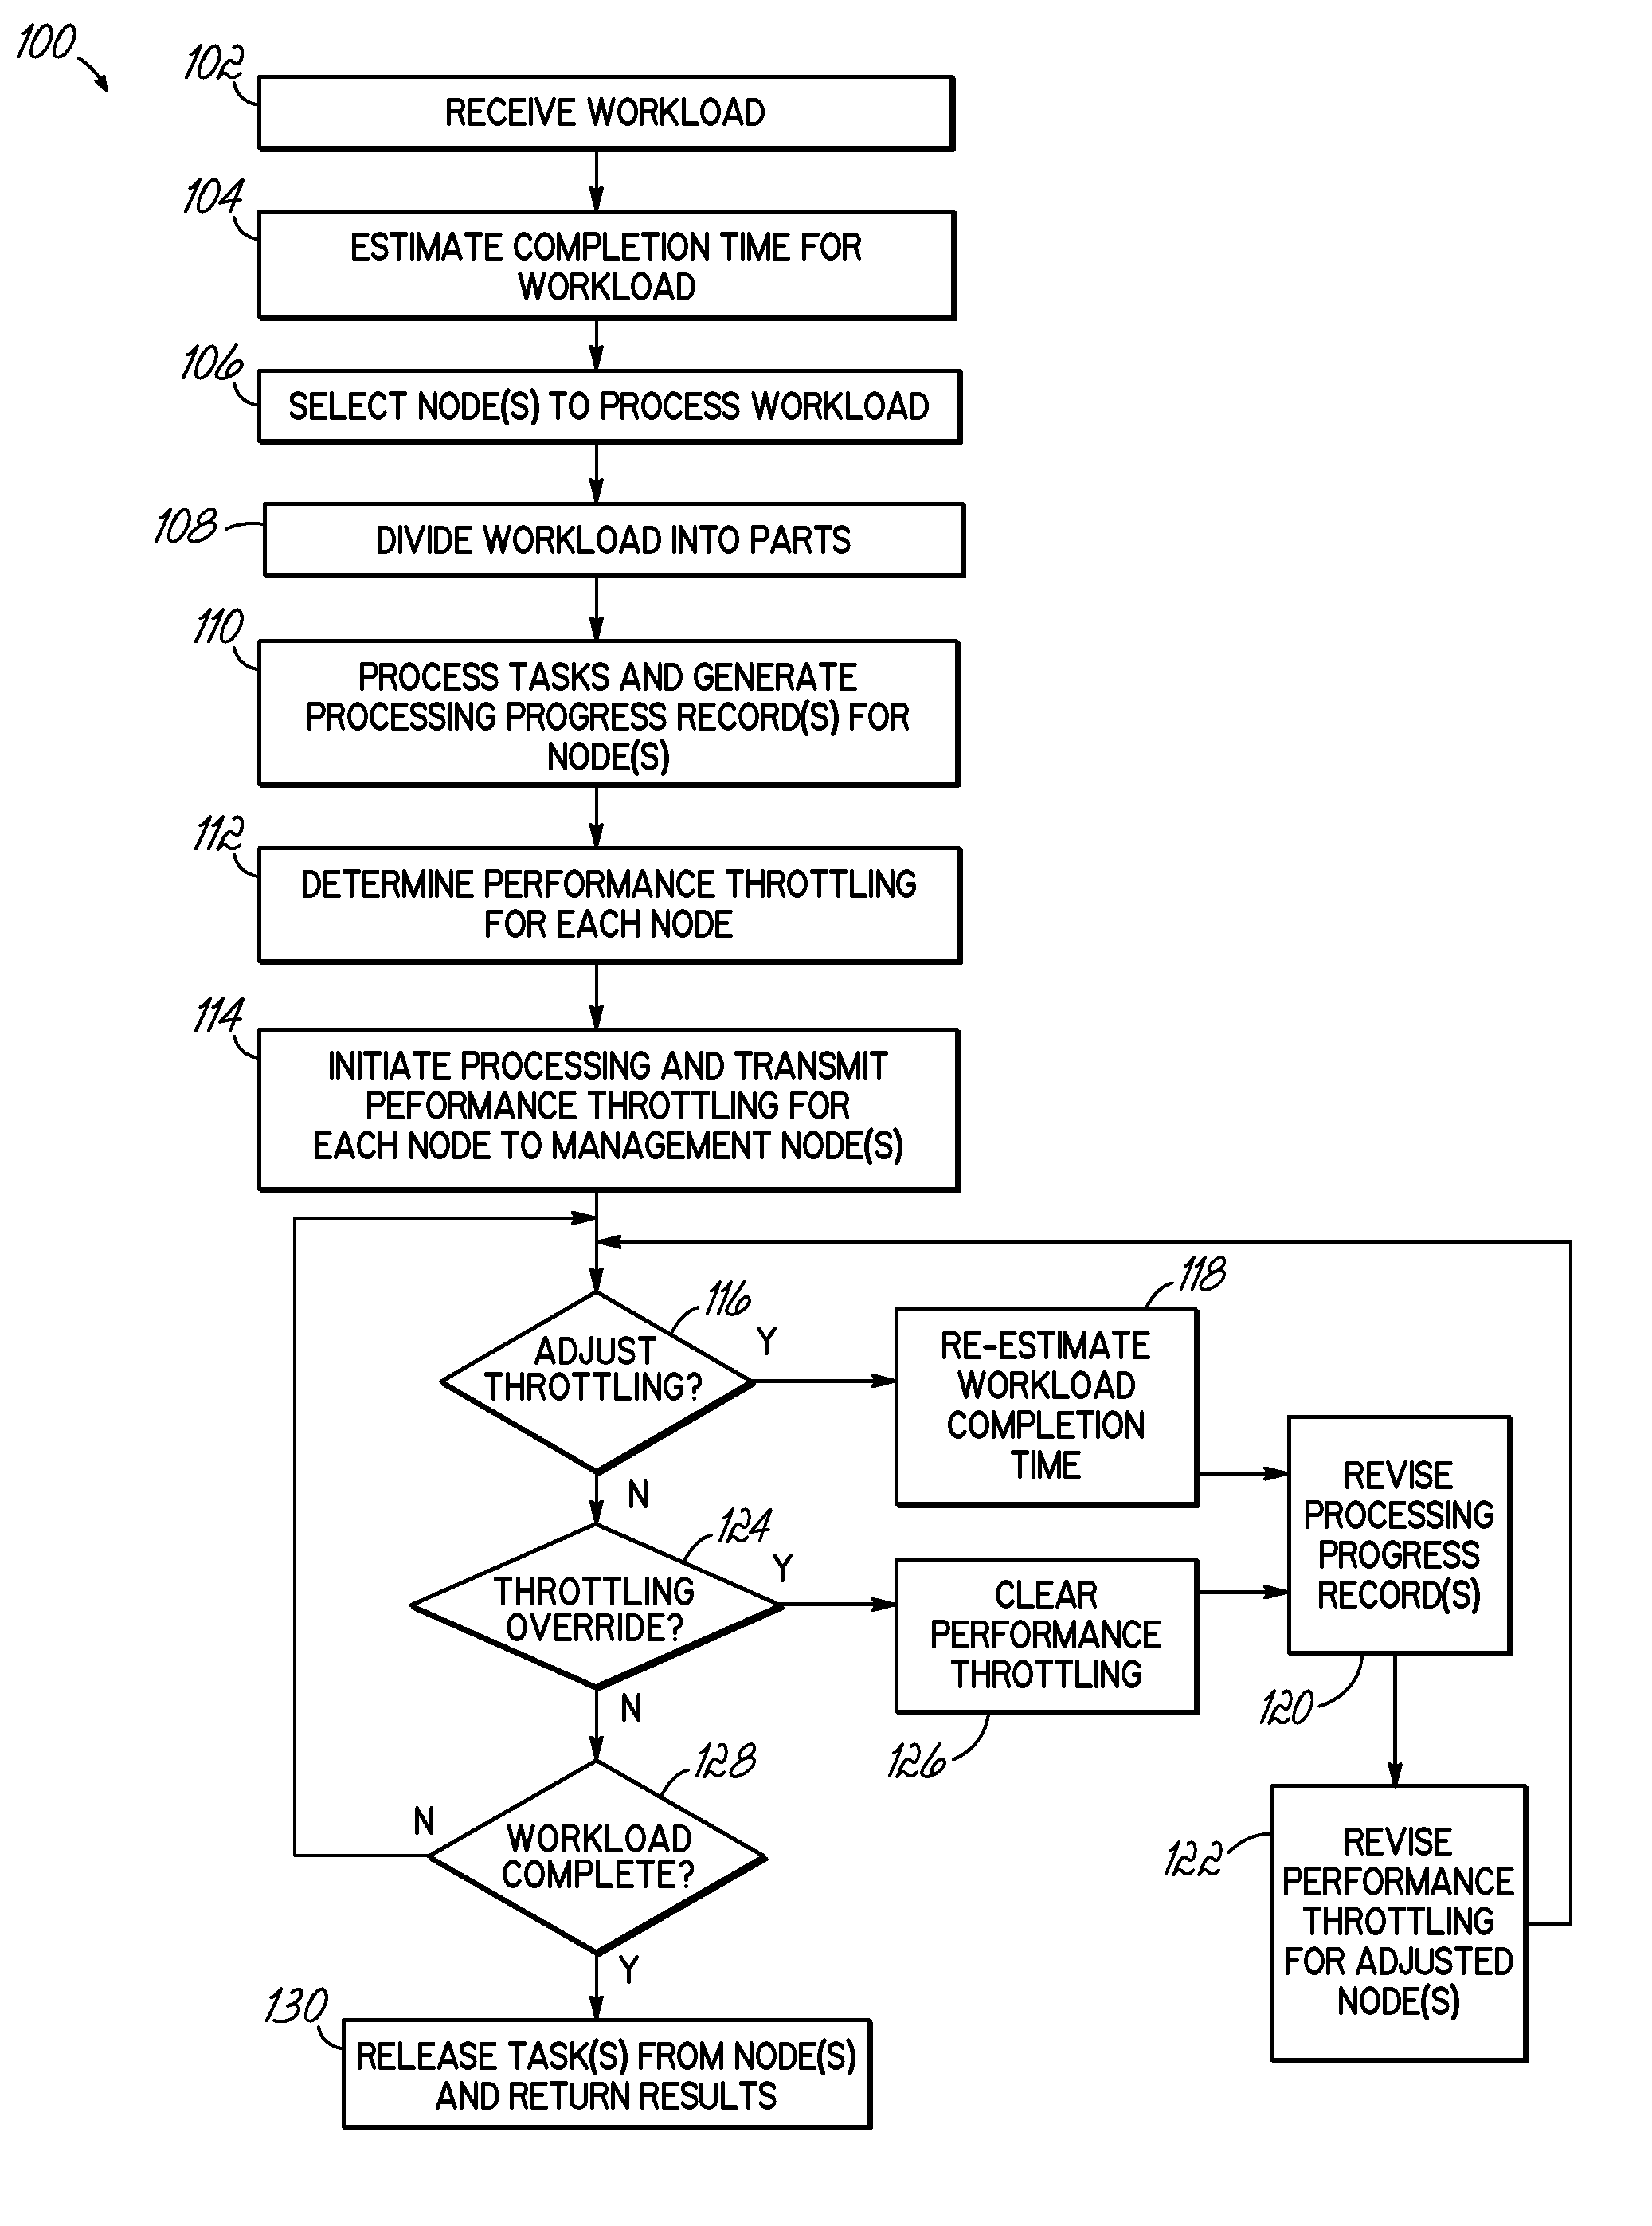 Power adjustment based on completion times in a parallel computing system